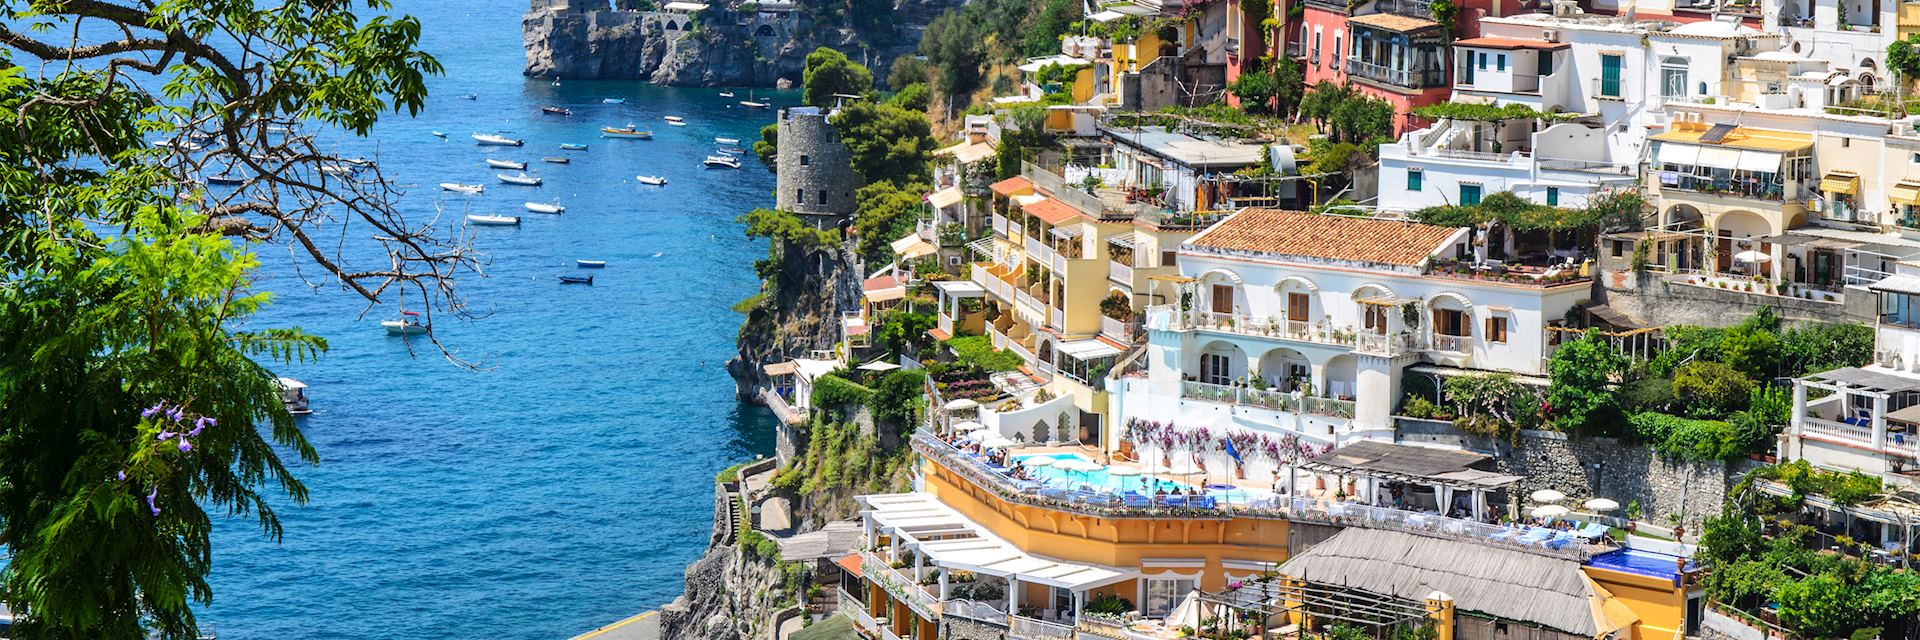 Best time to Visit The Amalfi Coast, Climate Guide